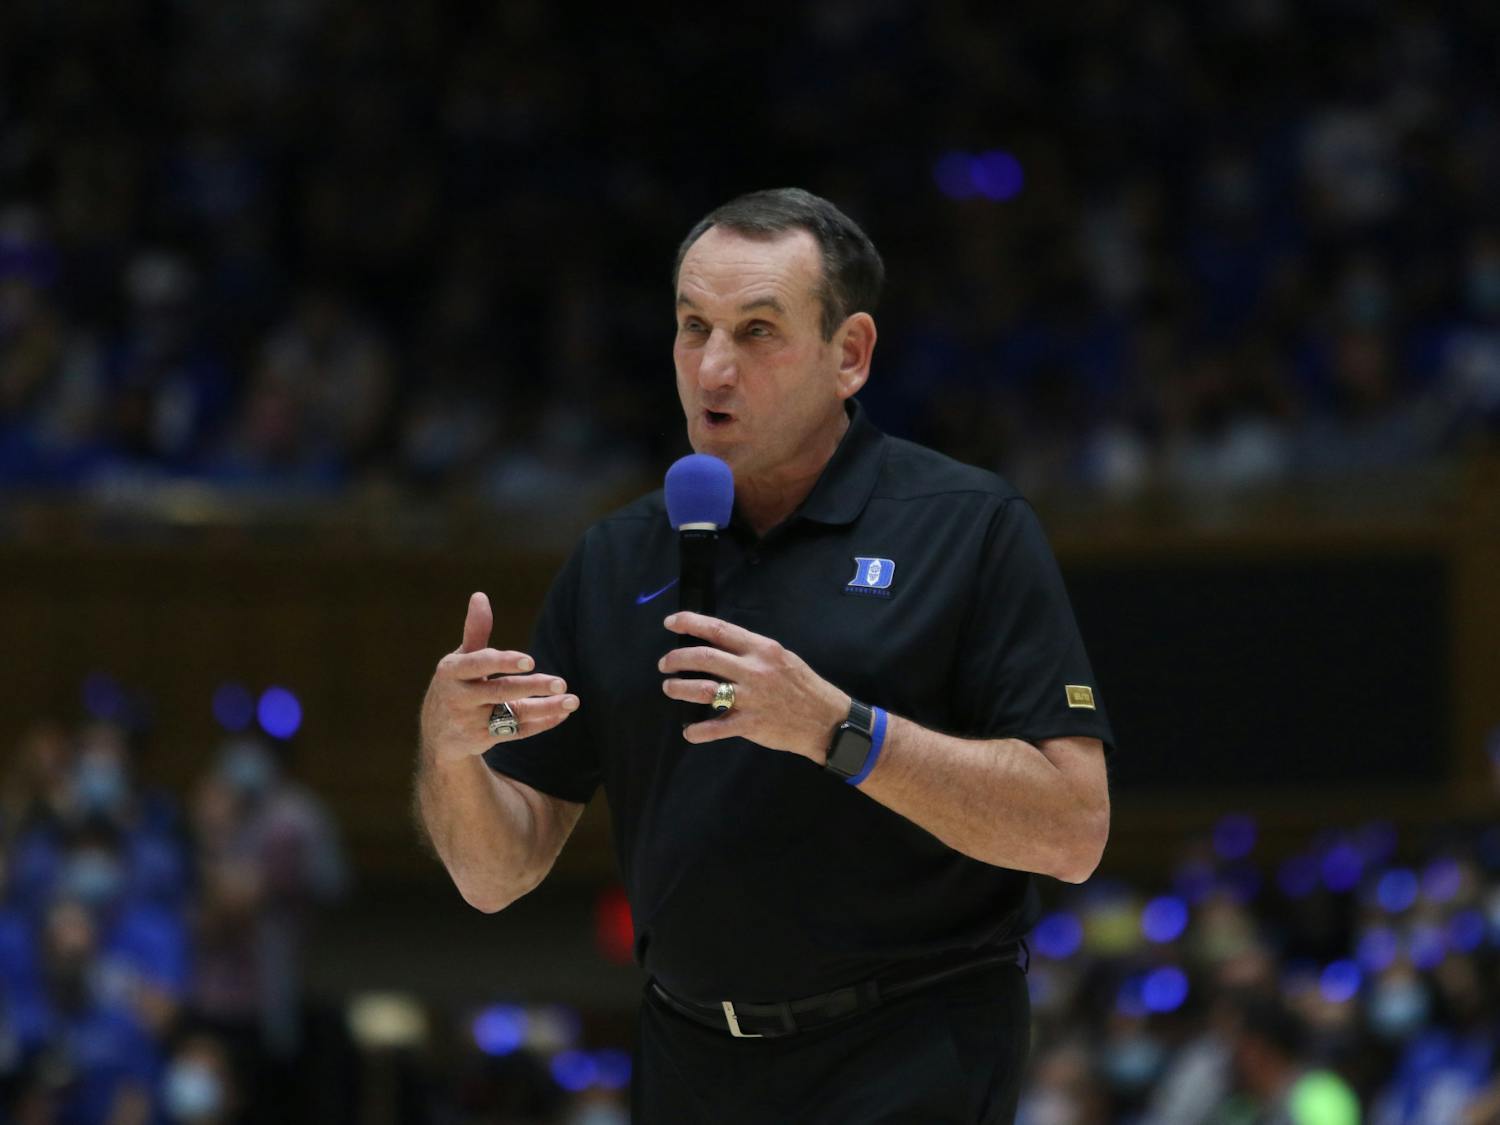 Mike Krzyzewski urged for action after a mass shooting in Uvalde, Texas.